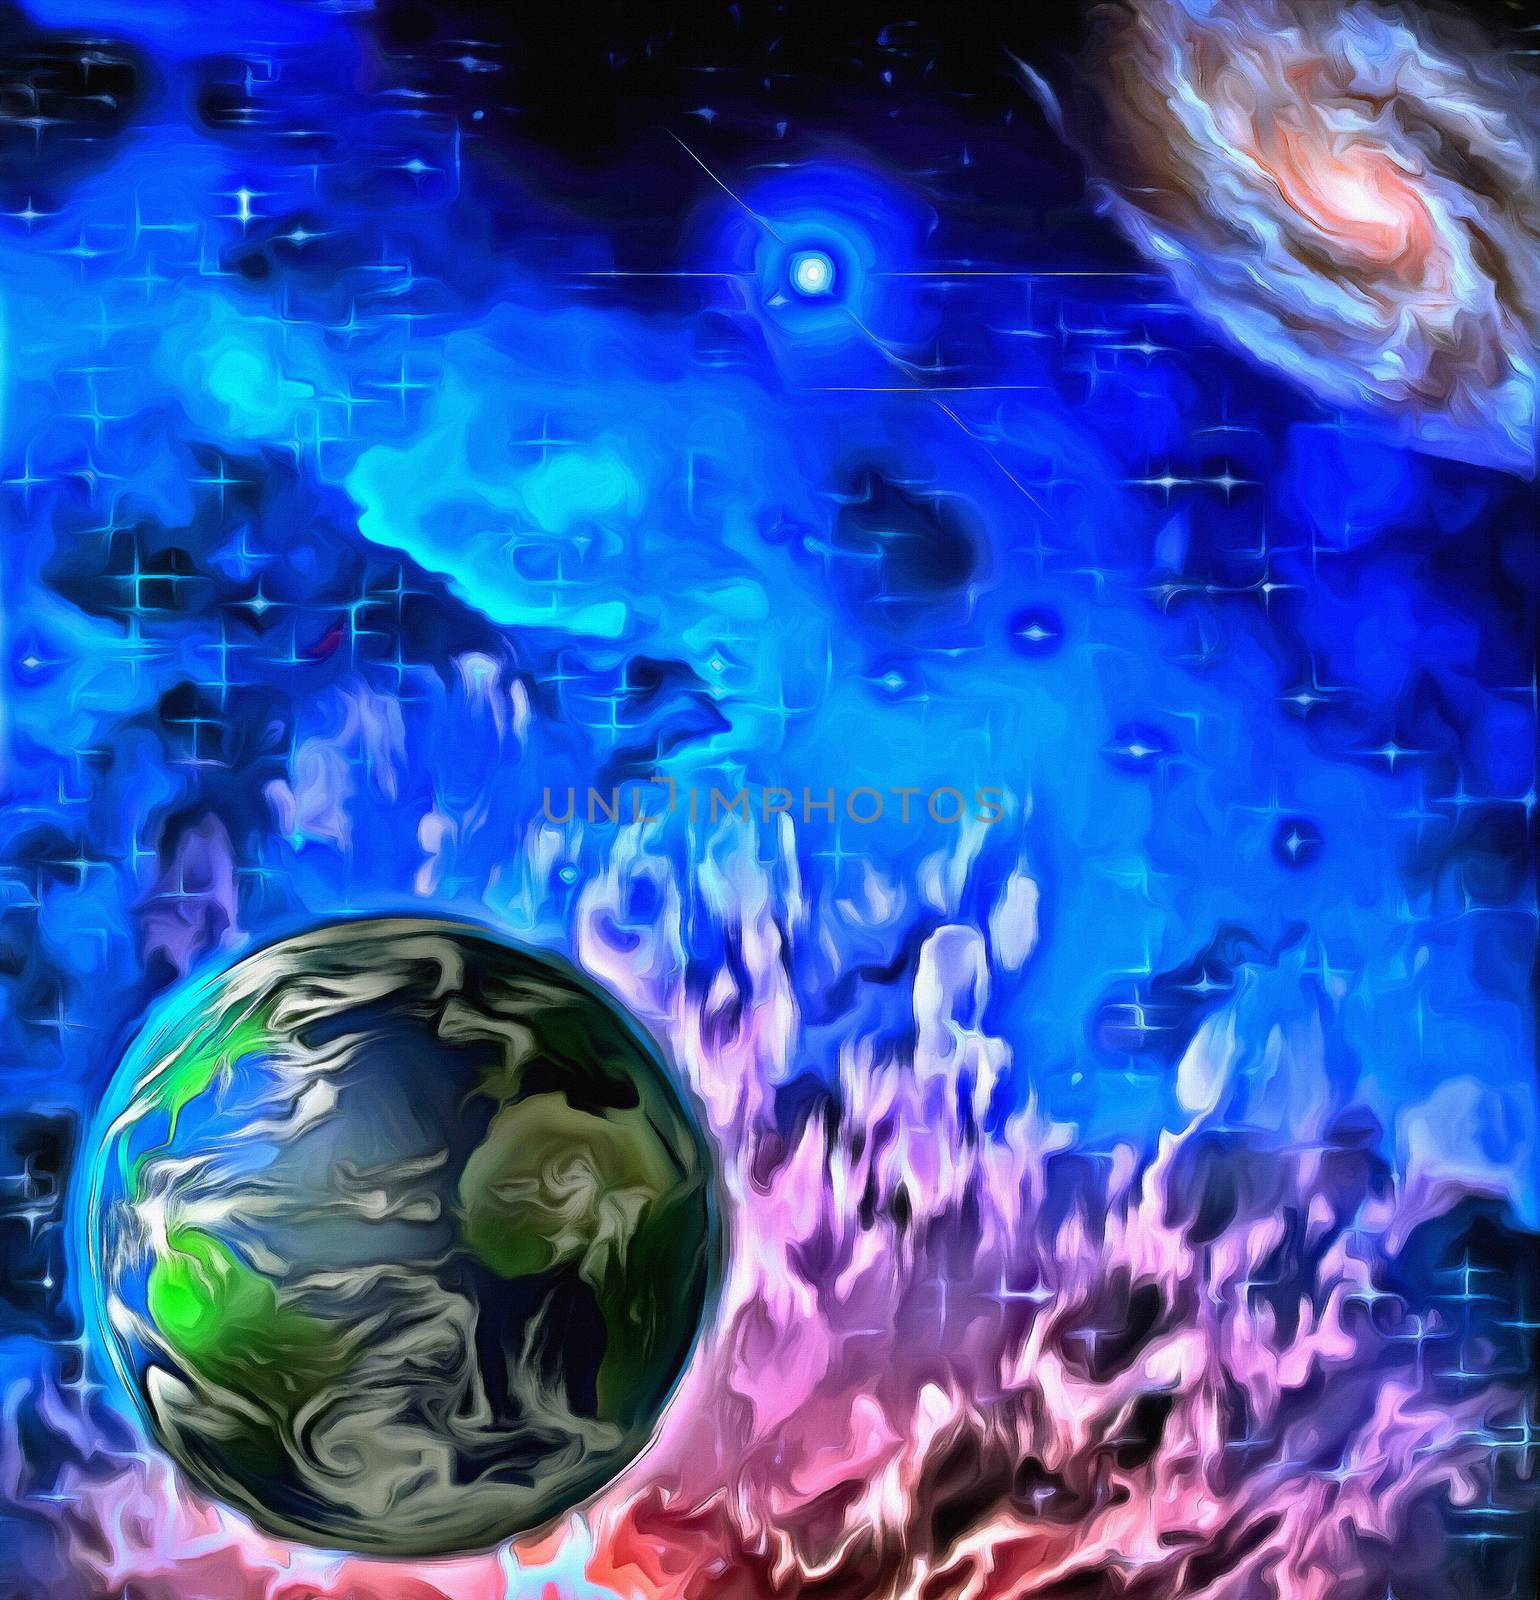 Surreal painting. Planet Earth in endless universe.